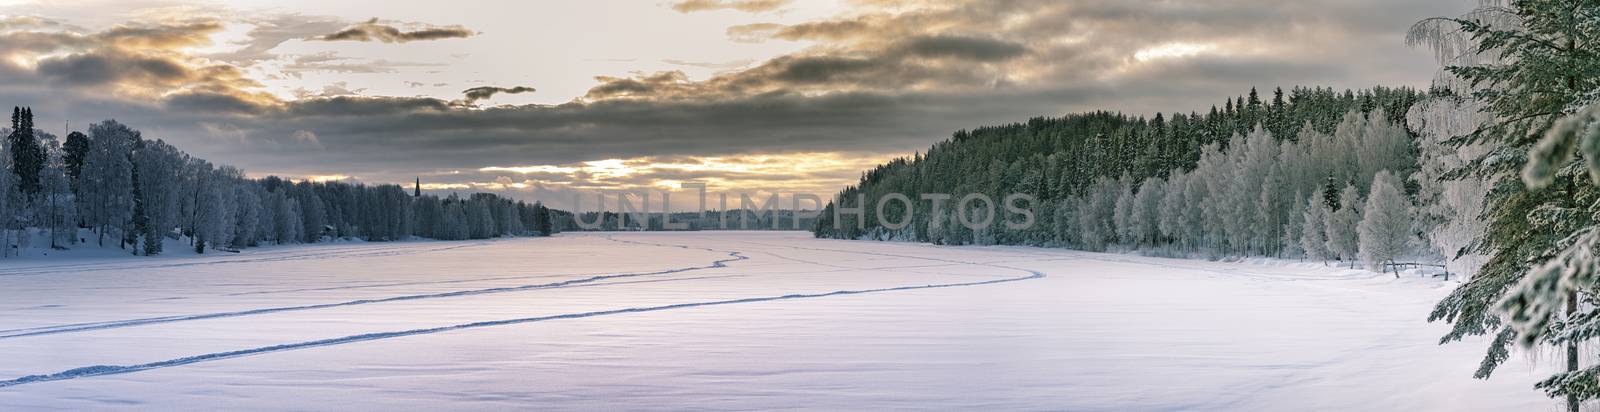 Sunset panorama over winter forest at sides and frozen river in the middle. Typical Northern Sweden landscape - birch and spruce tree covered by hoarfrost - very cold day, Lappland, Sweden